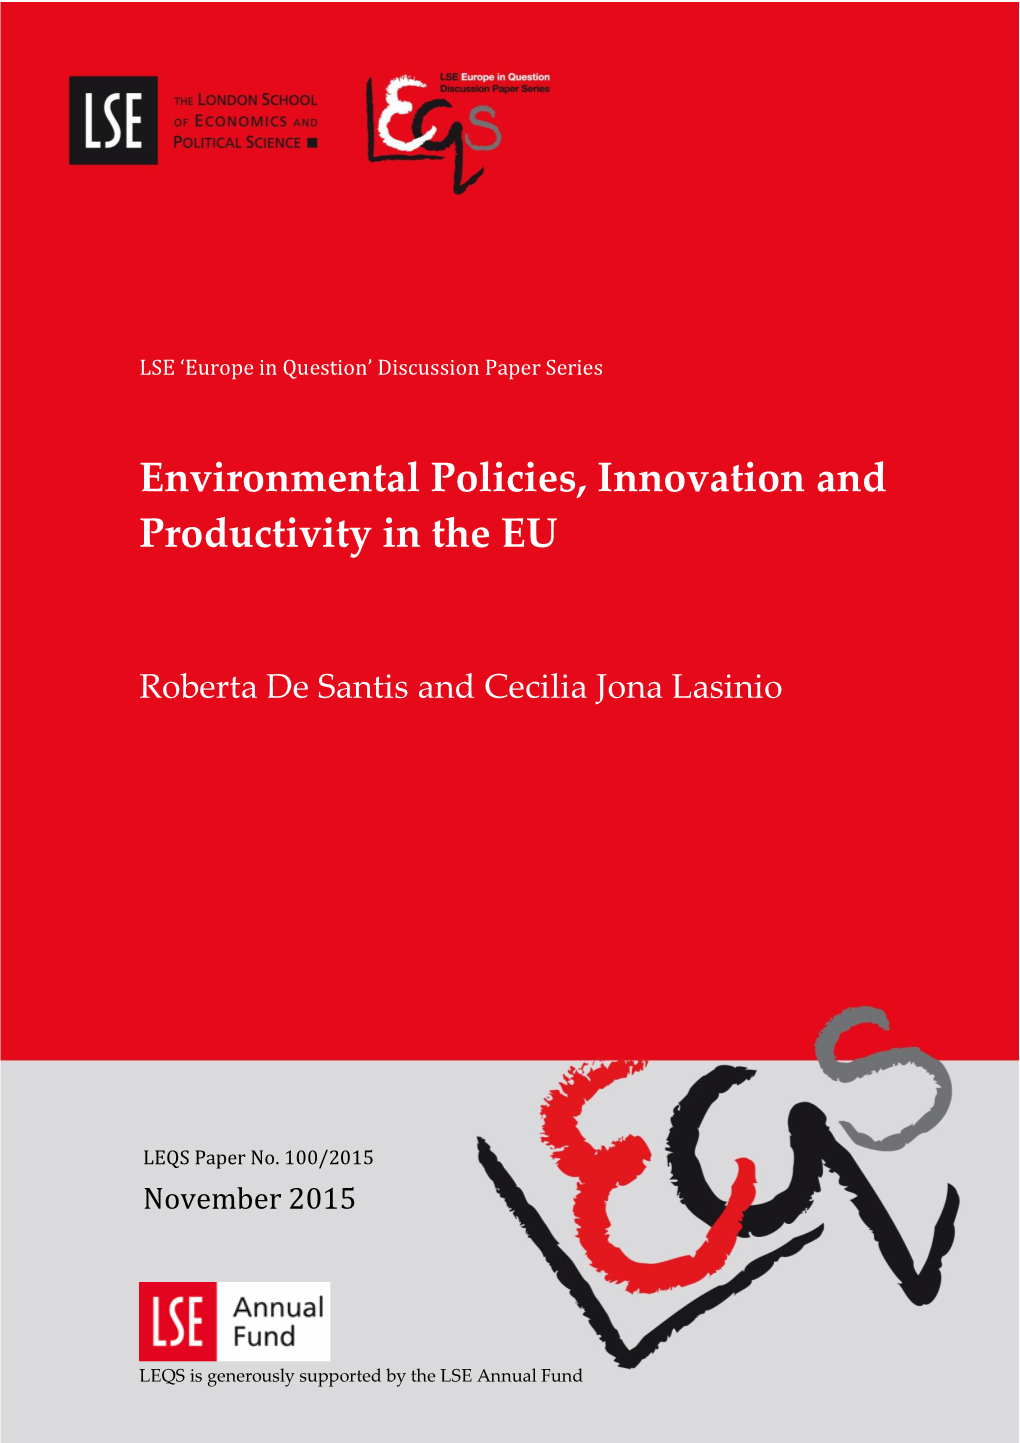 Environmental Policies, Innovation and Productivity in the EU